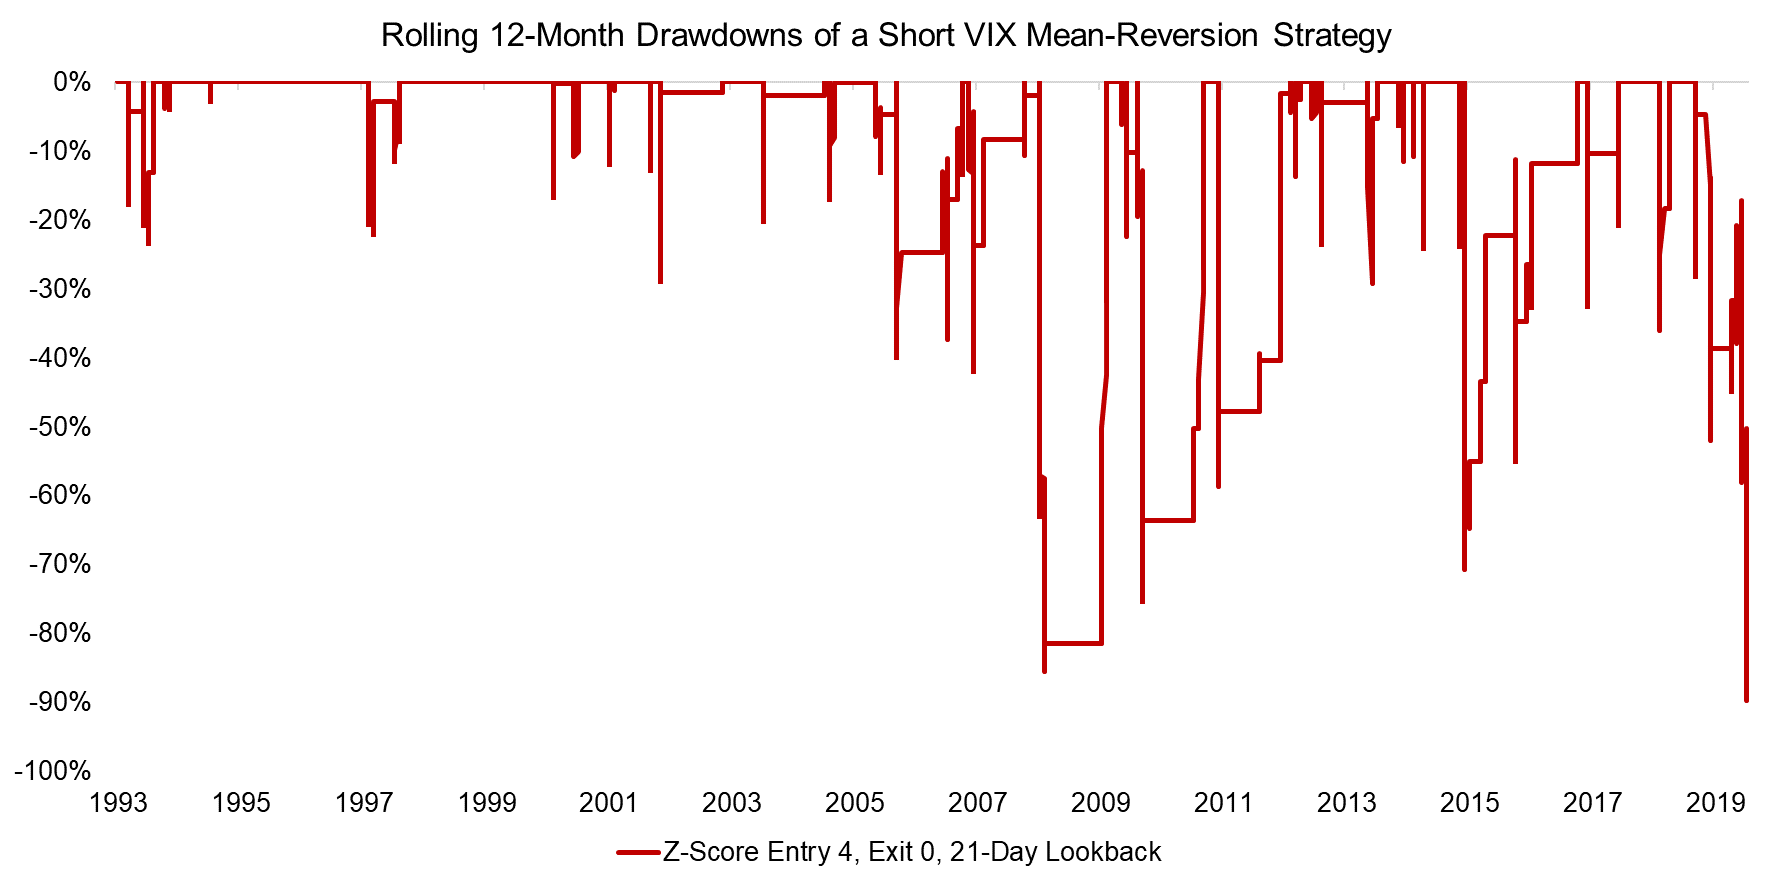 Rolling 12-Month Drawdowns of a Short VIX Mean-Reversion Strategy